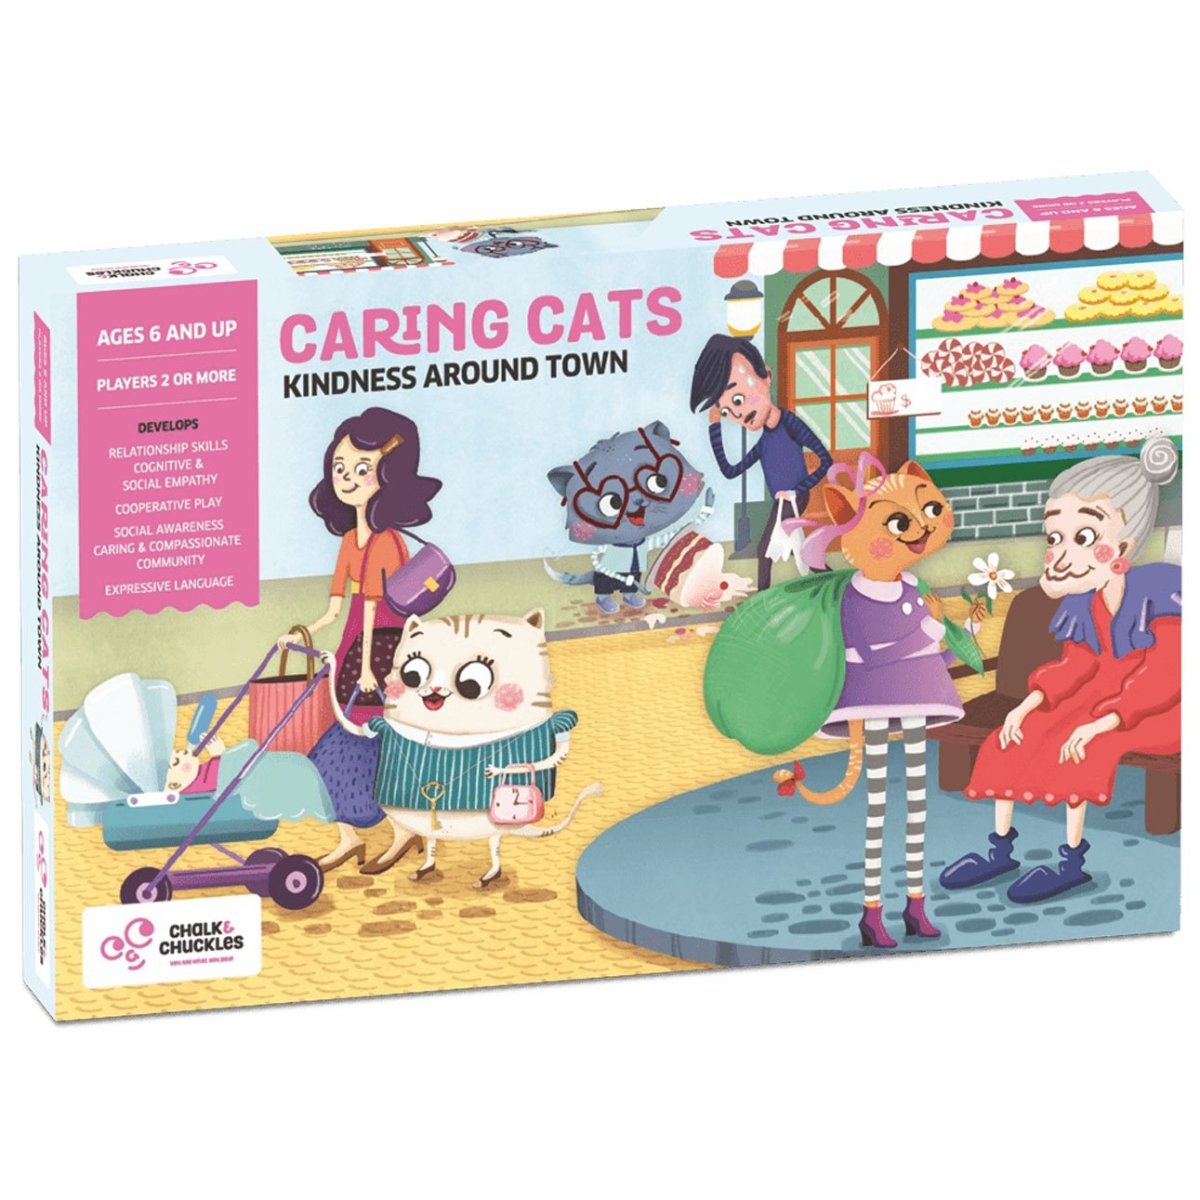 ZCC Caring cats - Kindness around town, Age 6 and above freeshipping - Zigyasaw